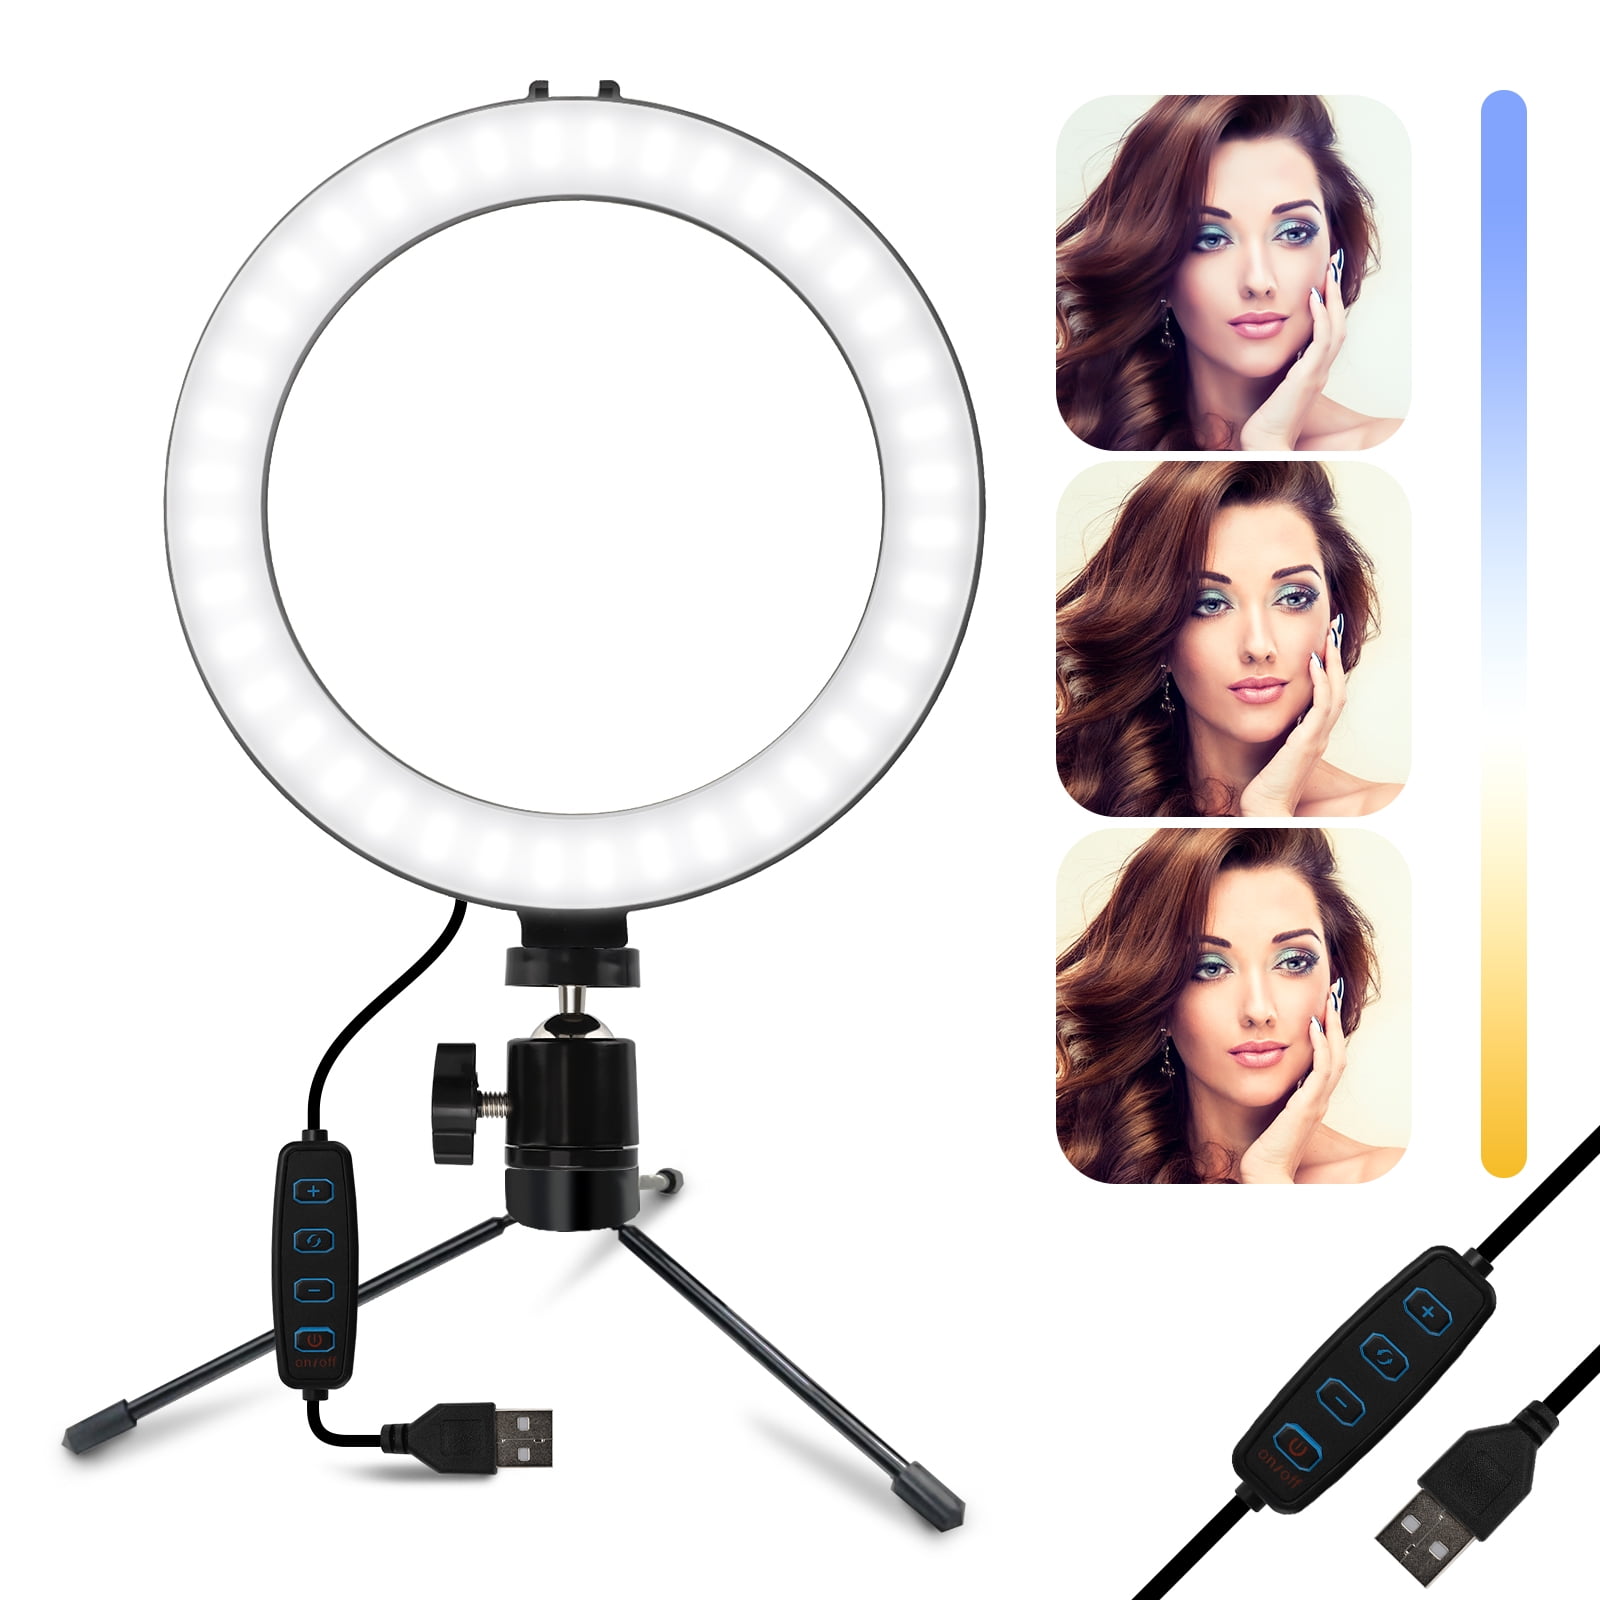 Cerlingwee Sturdy and Durable Portable Stable Trpod Wide Appliaction Light Fill Light Convenient Selfie Makeup for Live Stream YouTube Video